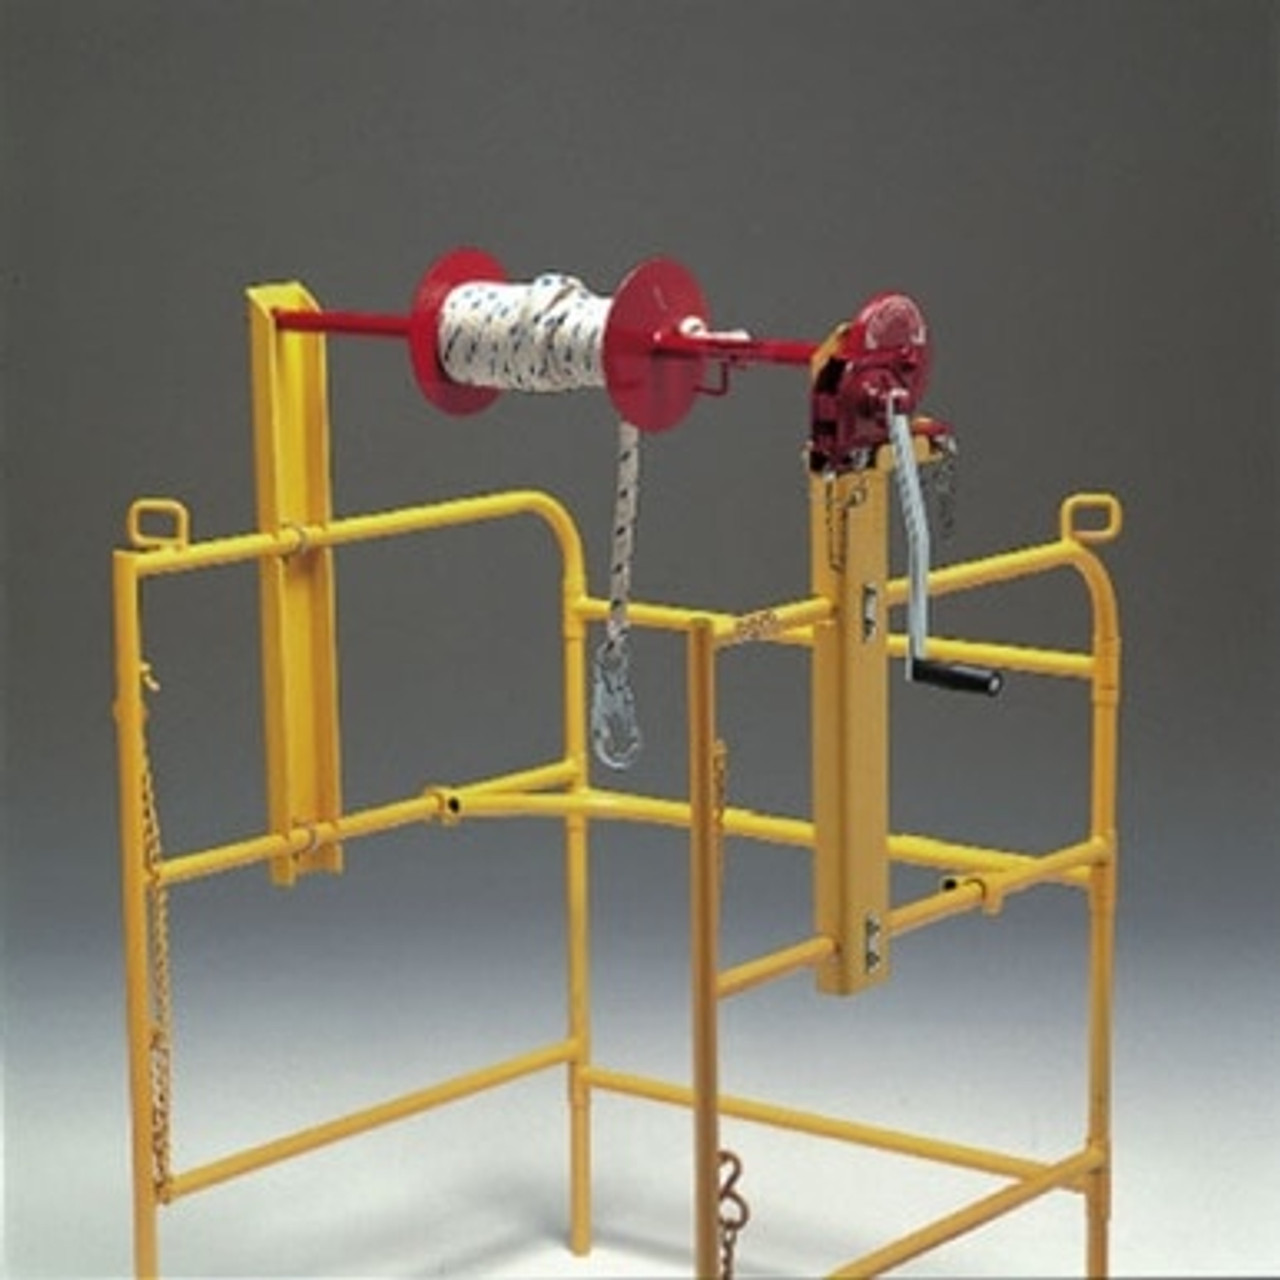 Manhole Hook Cover Lid Lifter - Confined Space Entry